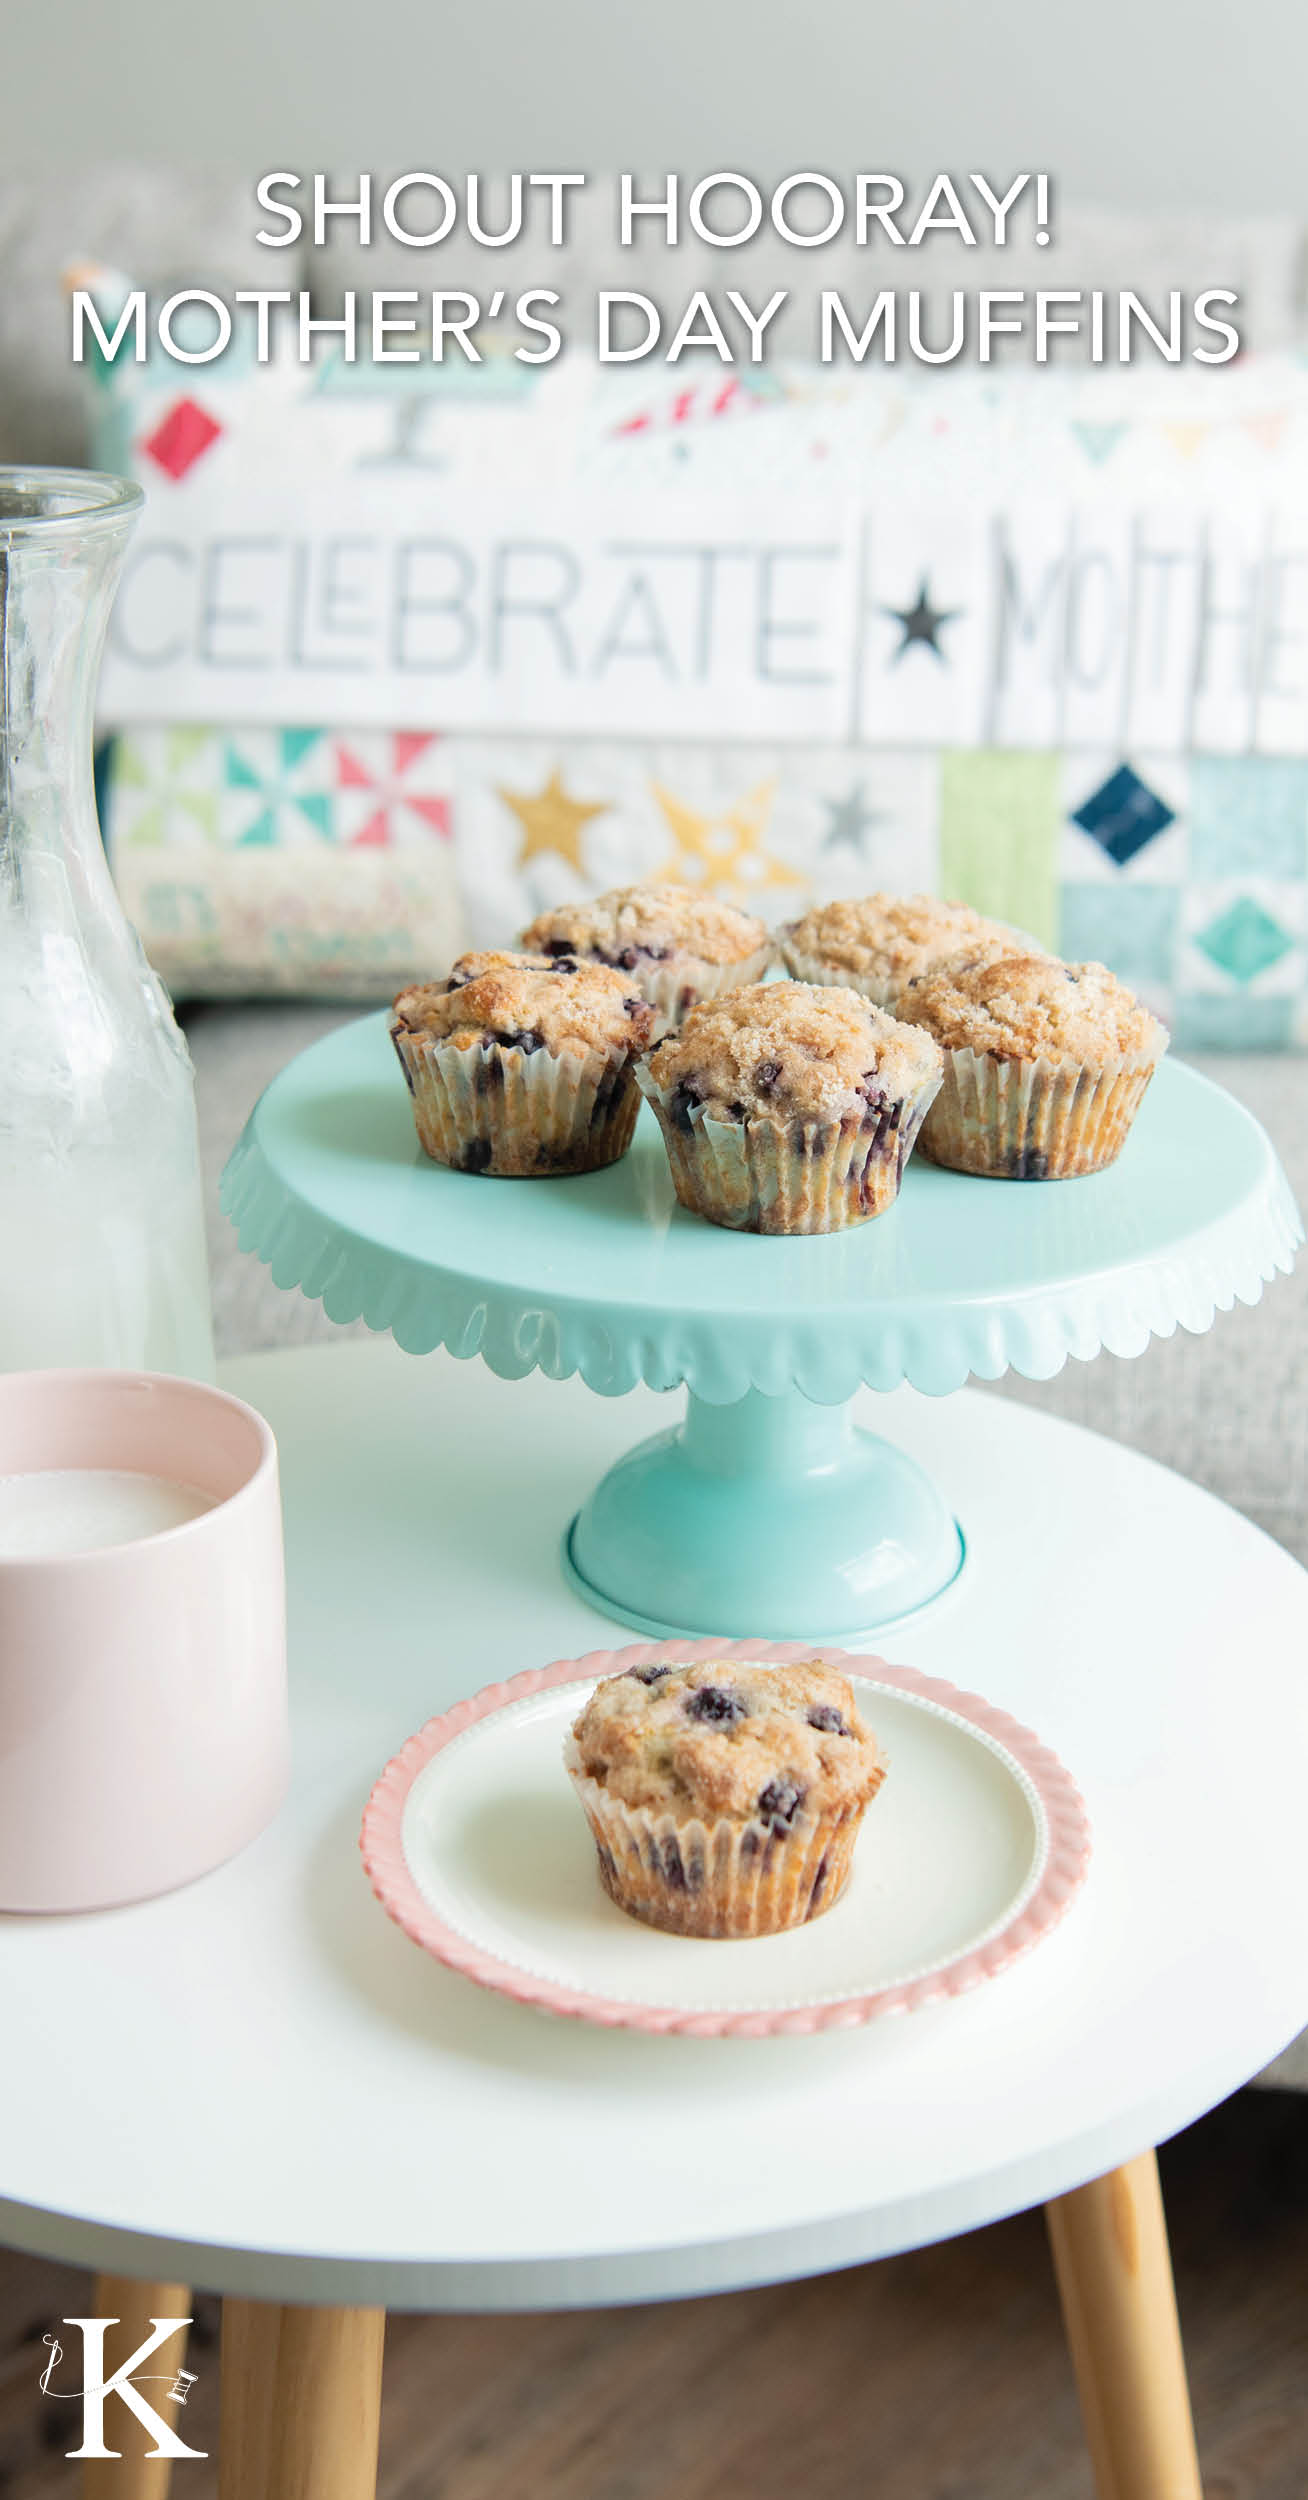 Shout-Hooray-Mothers-Day-Muffins